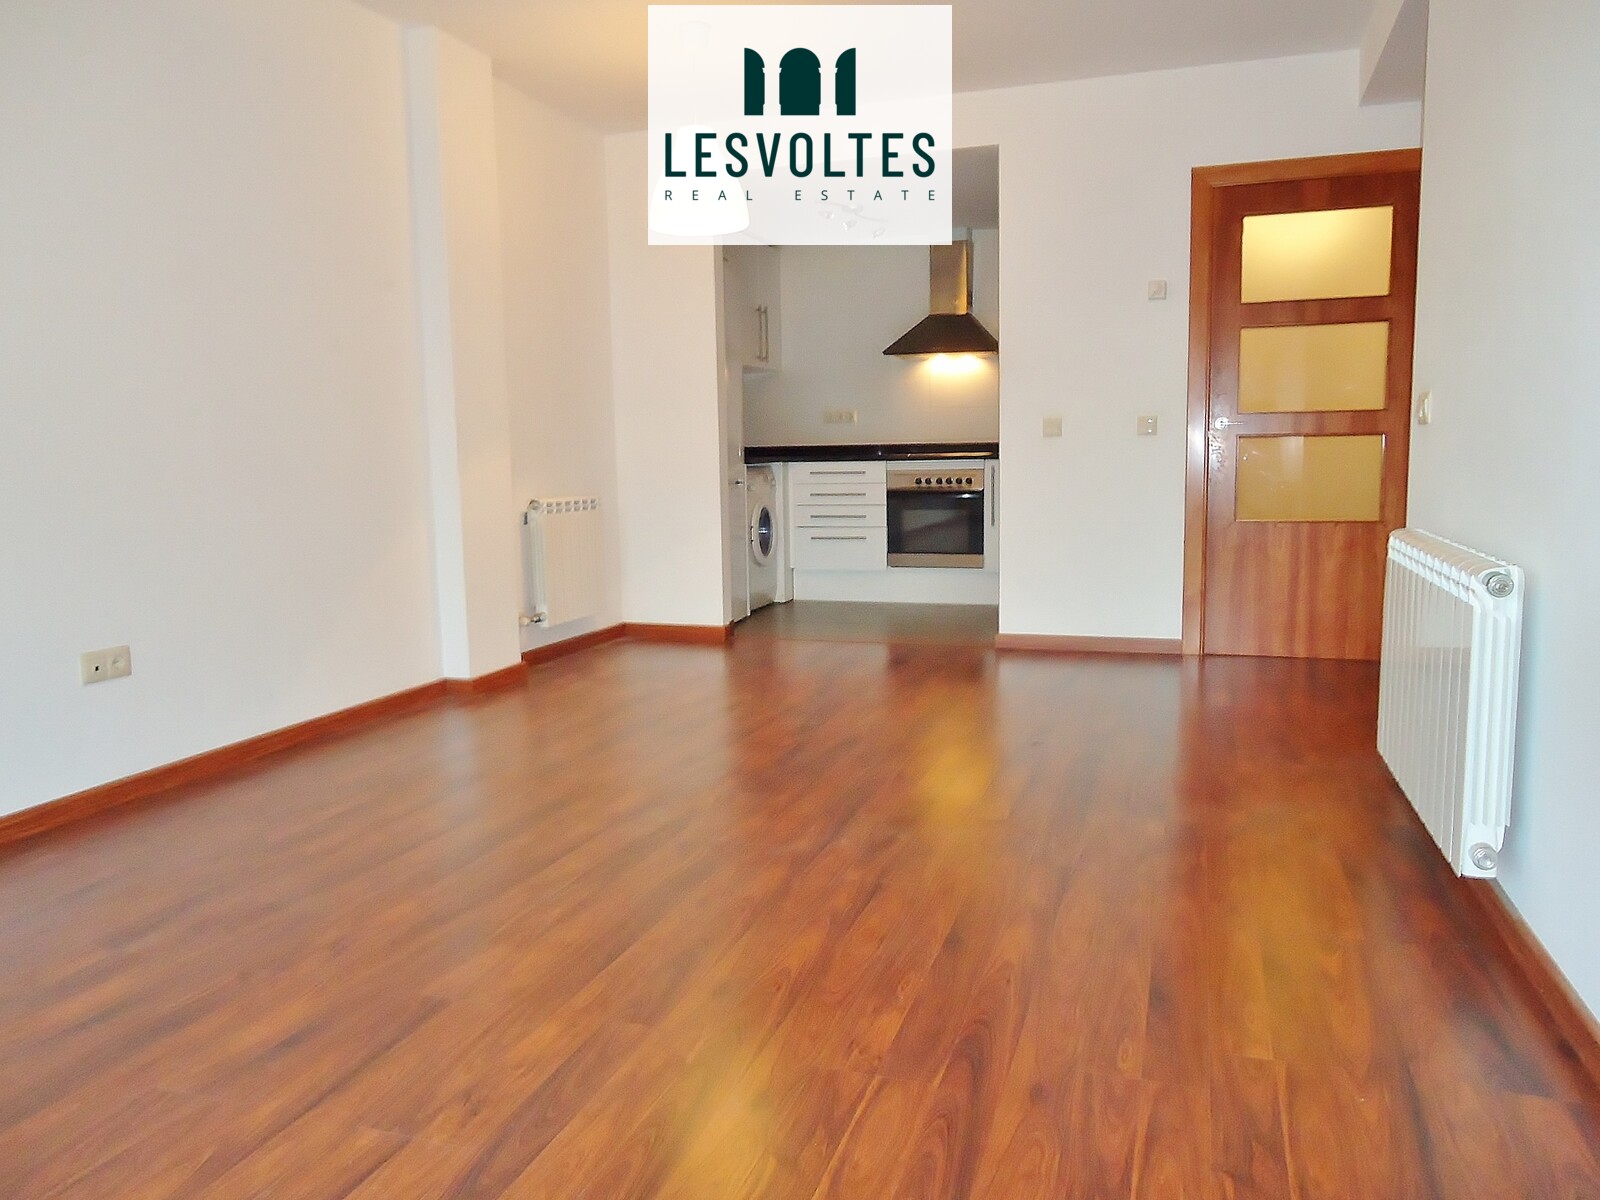 60 M2 APARTMENT ON THE FIRST FLOOR WITH ELEVATOR AND PARKING SPACE FOR SALE IN PALAFRUGELL.